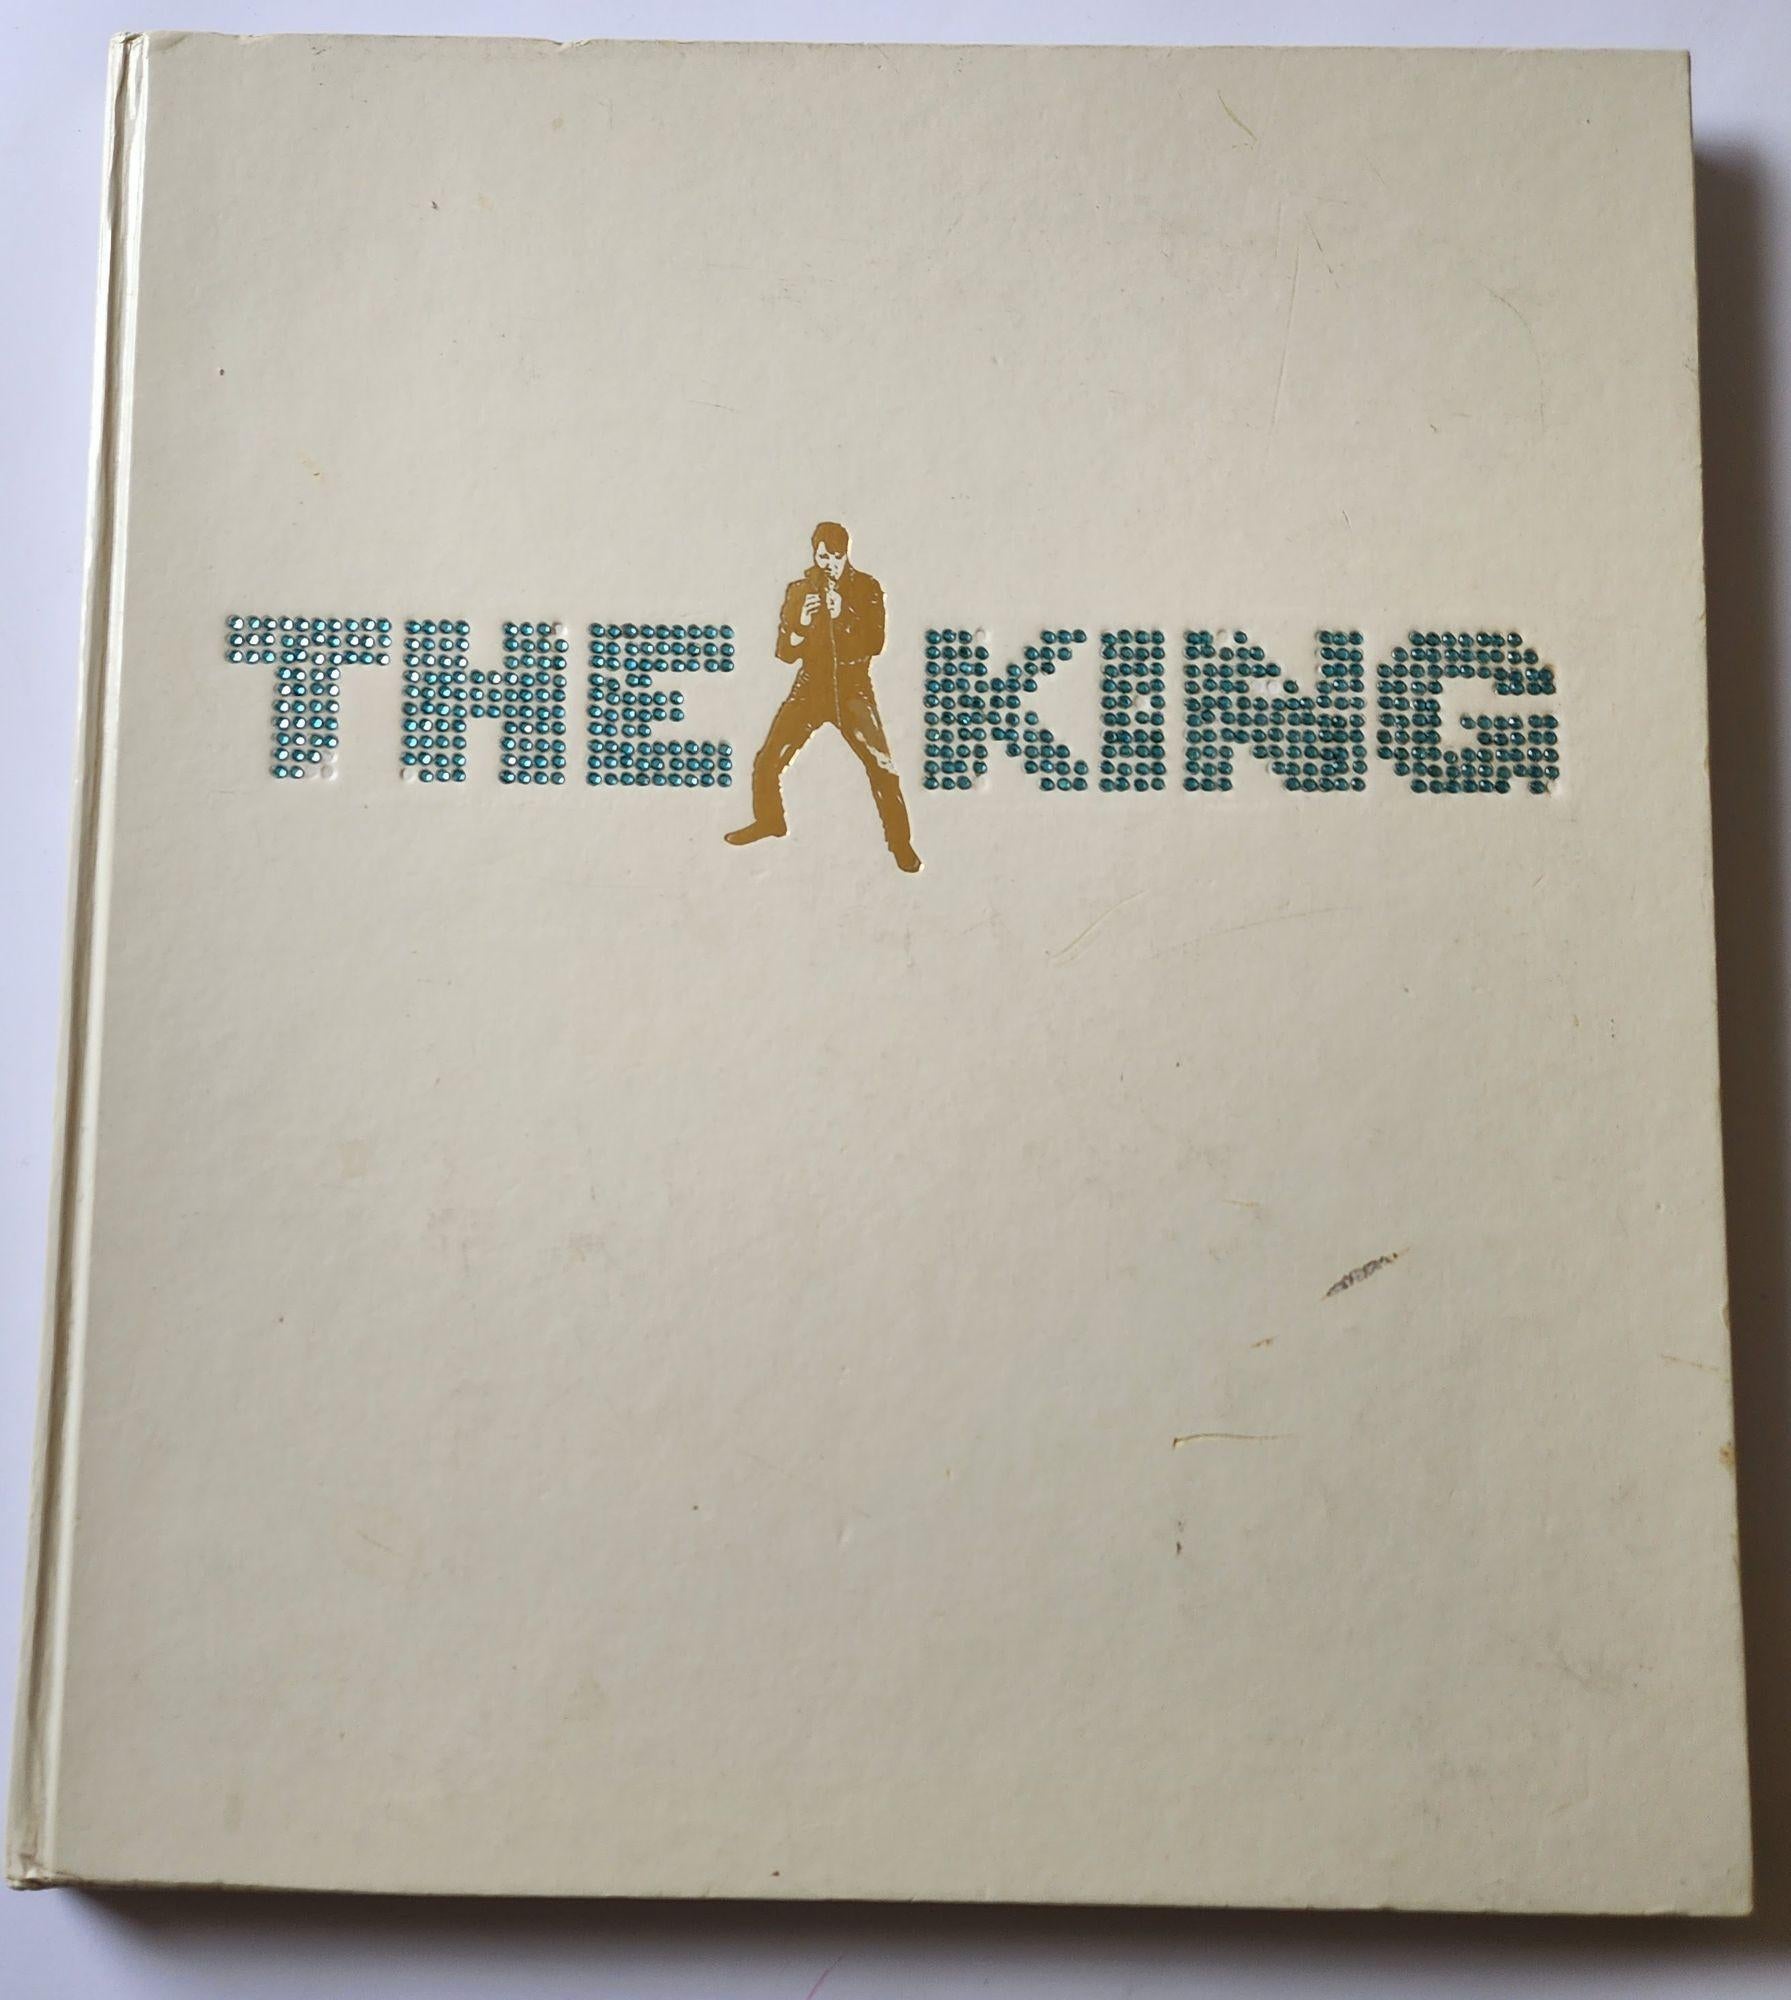 The King by Jim Piazza Elvis Presley - Large size coffee table book For Sale